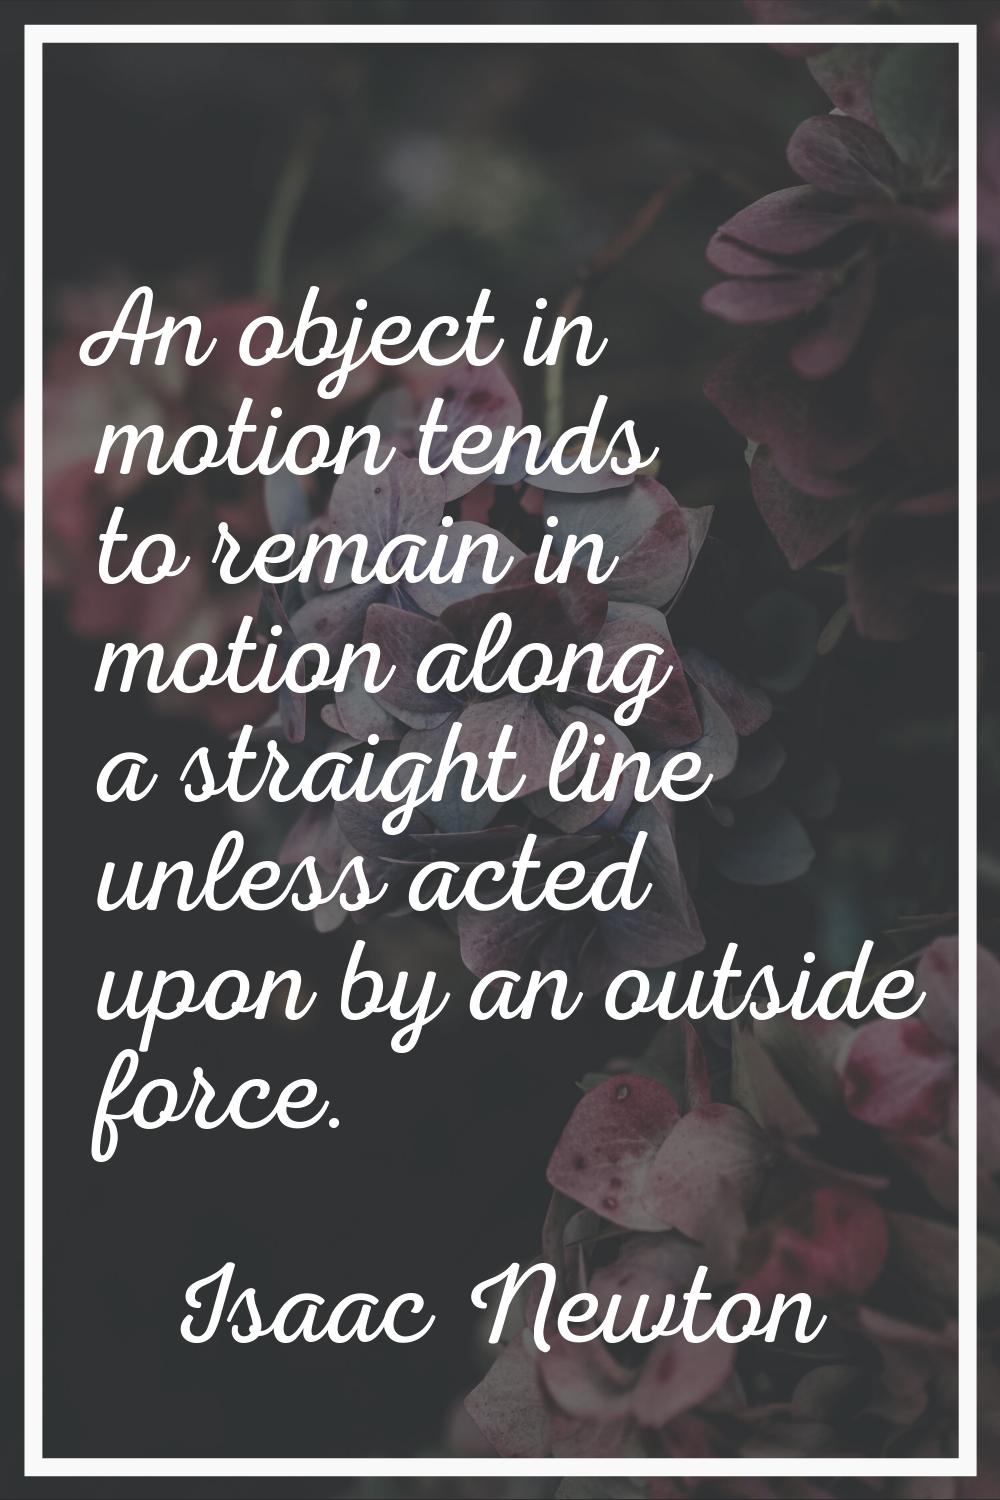 An object in motion tends to remain in motion along a straight line unless acted upon by an outside